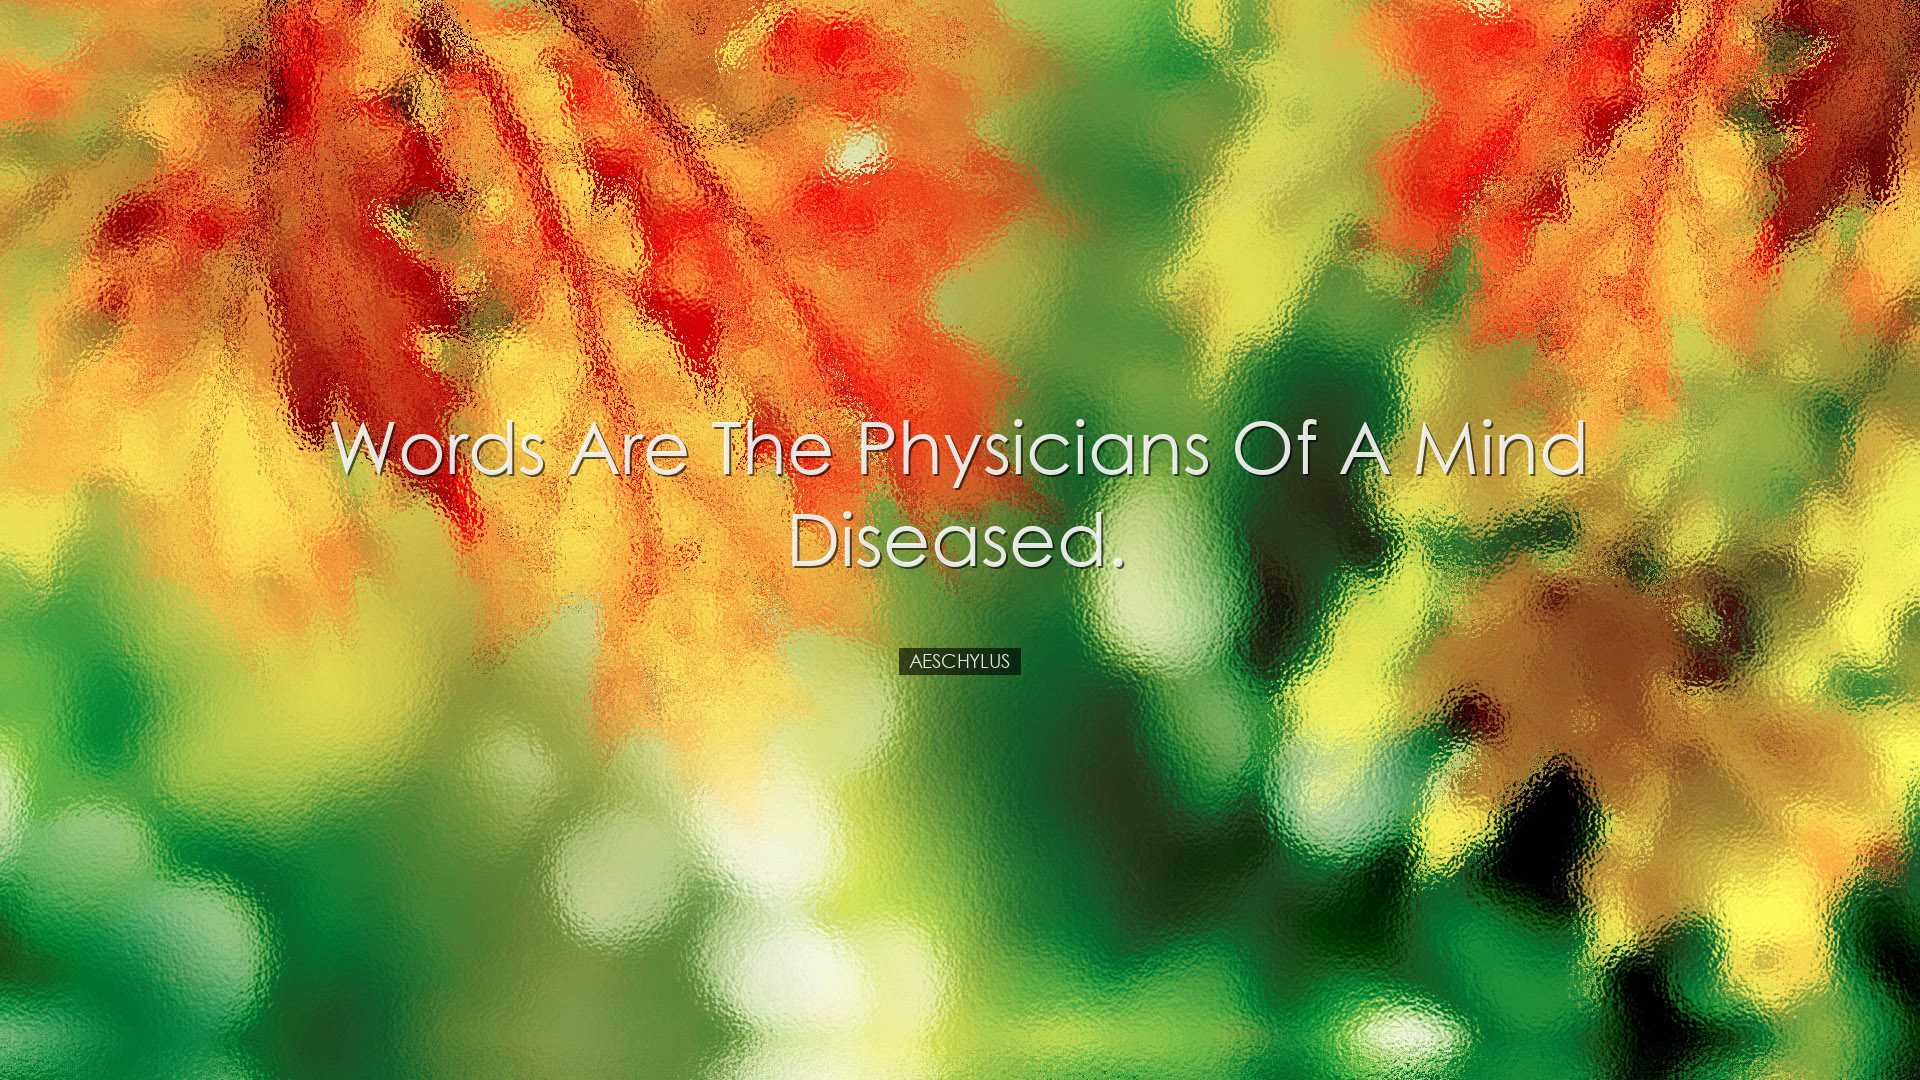 Words are the physicians of a mind diseased. - Aeschylus